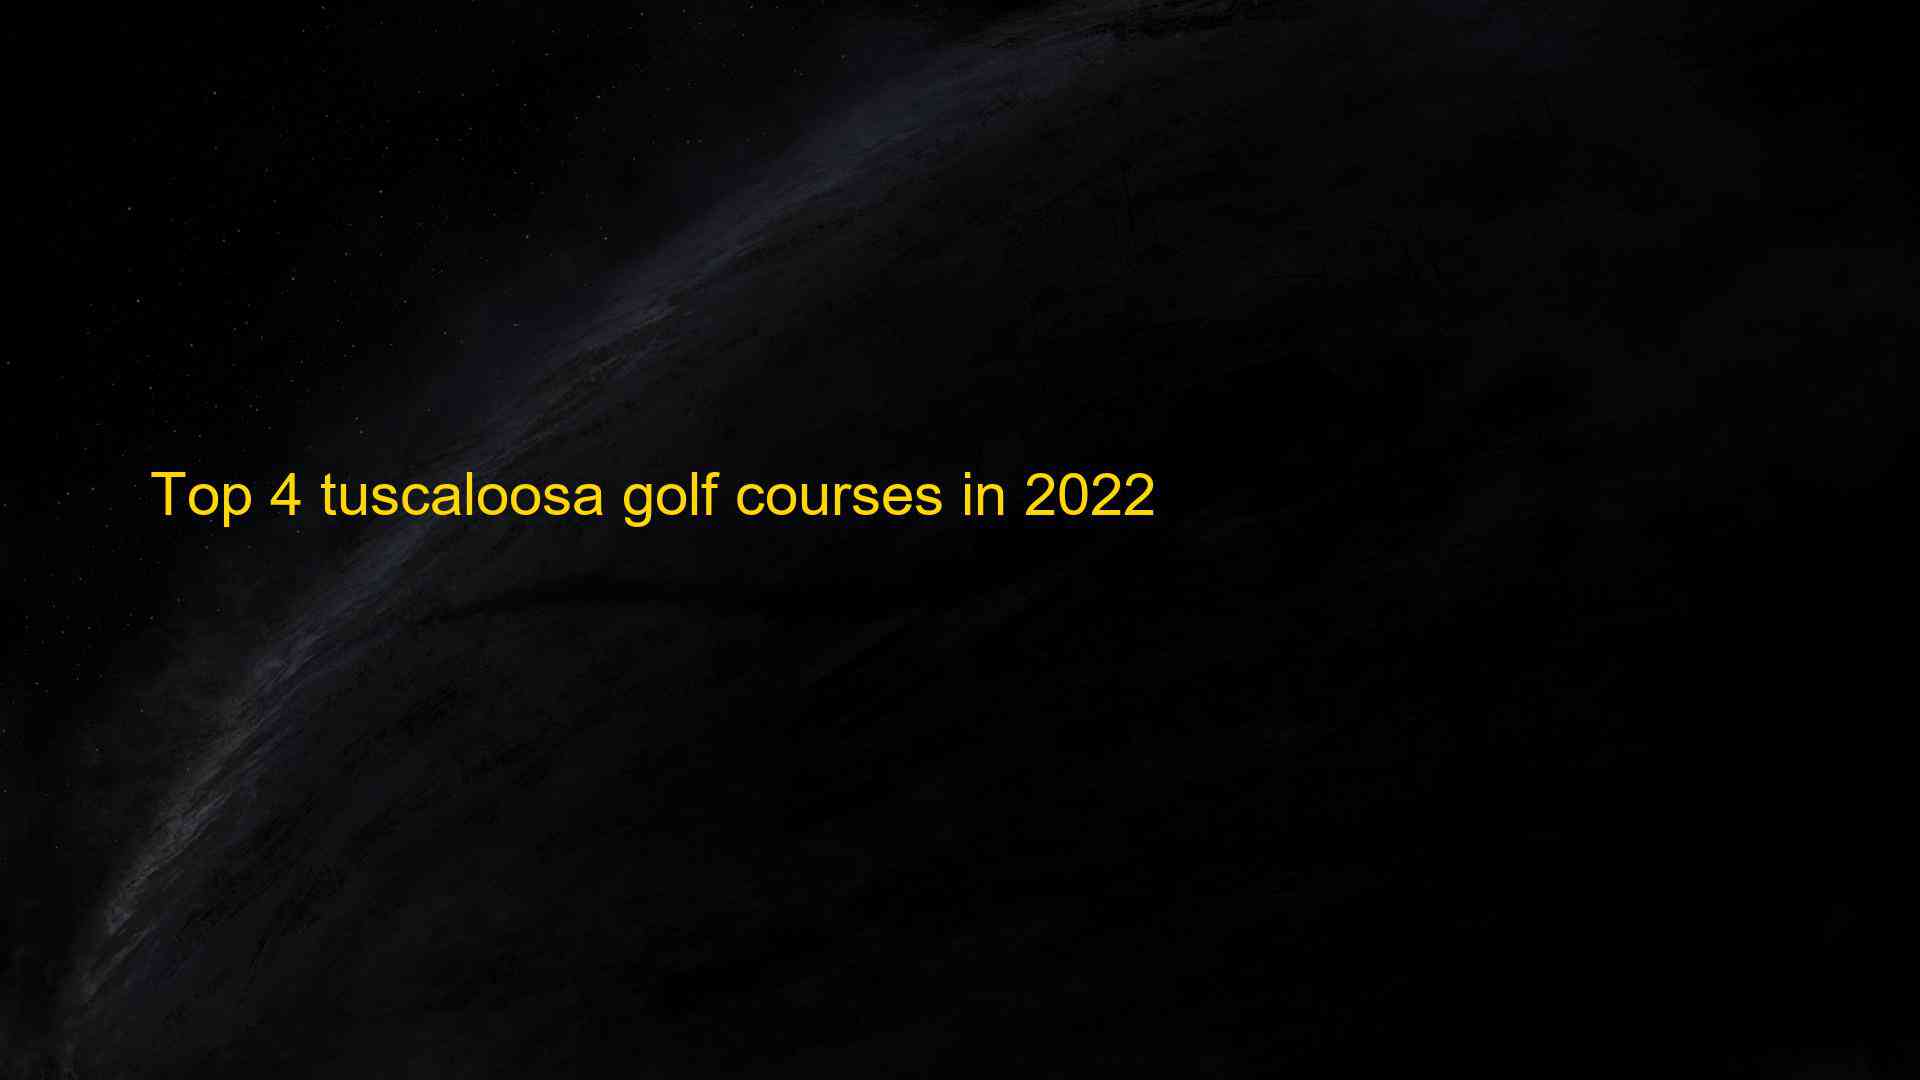 Top 4 tuscaloosa golf courses in 2022 1661935474